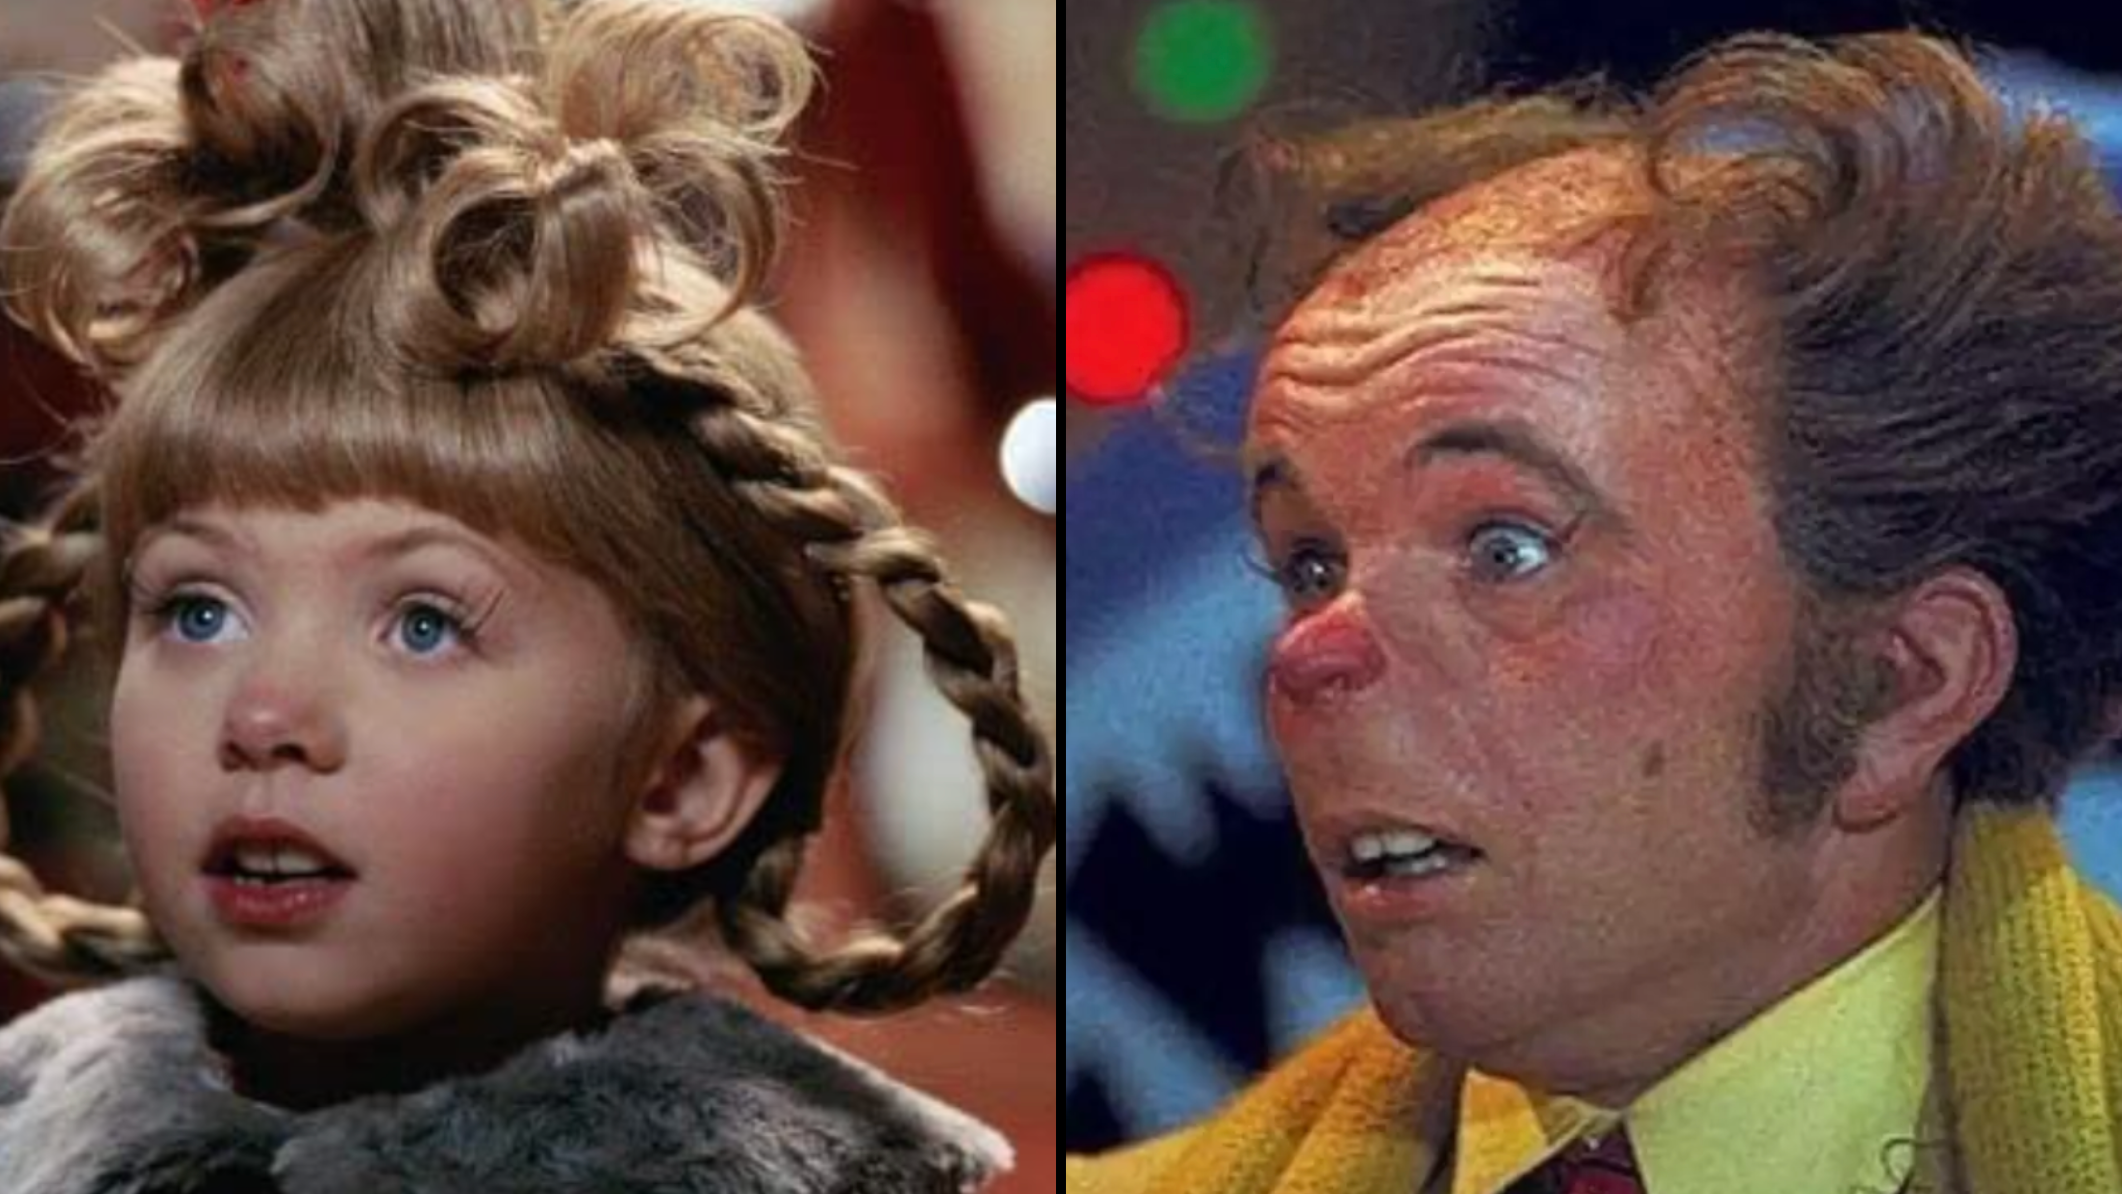 Everything you need to know about the Cindy Lou actress from How